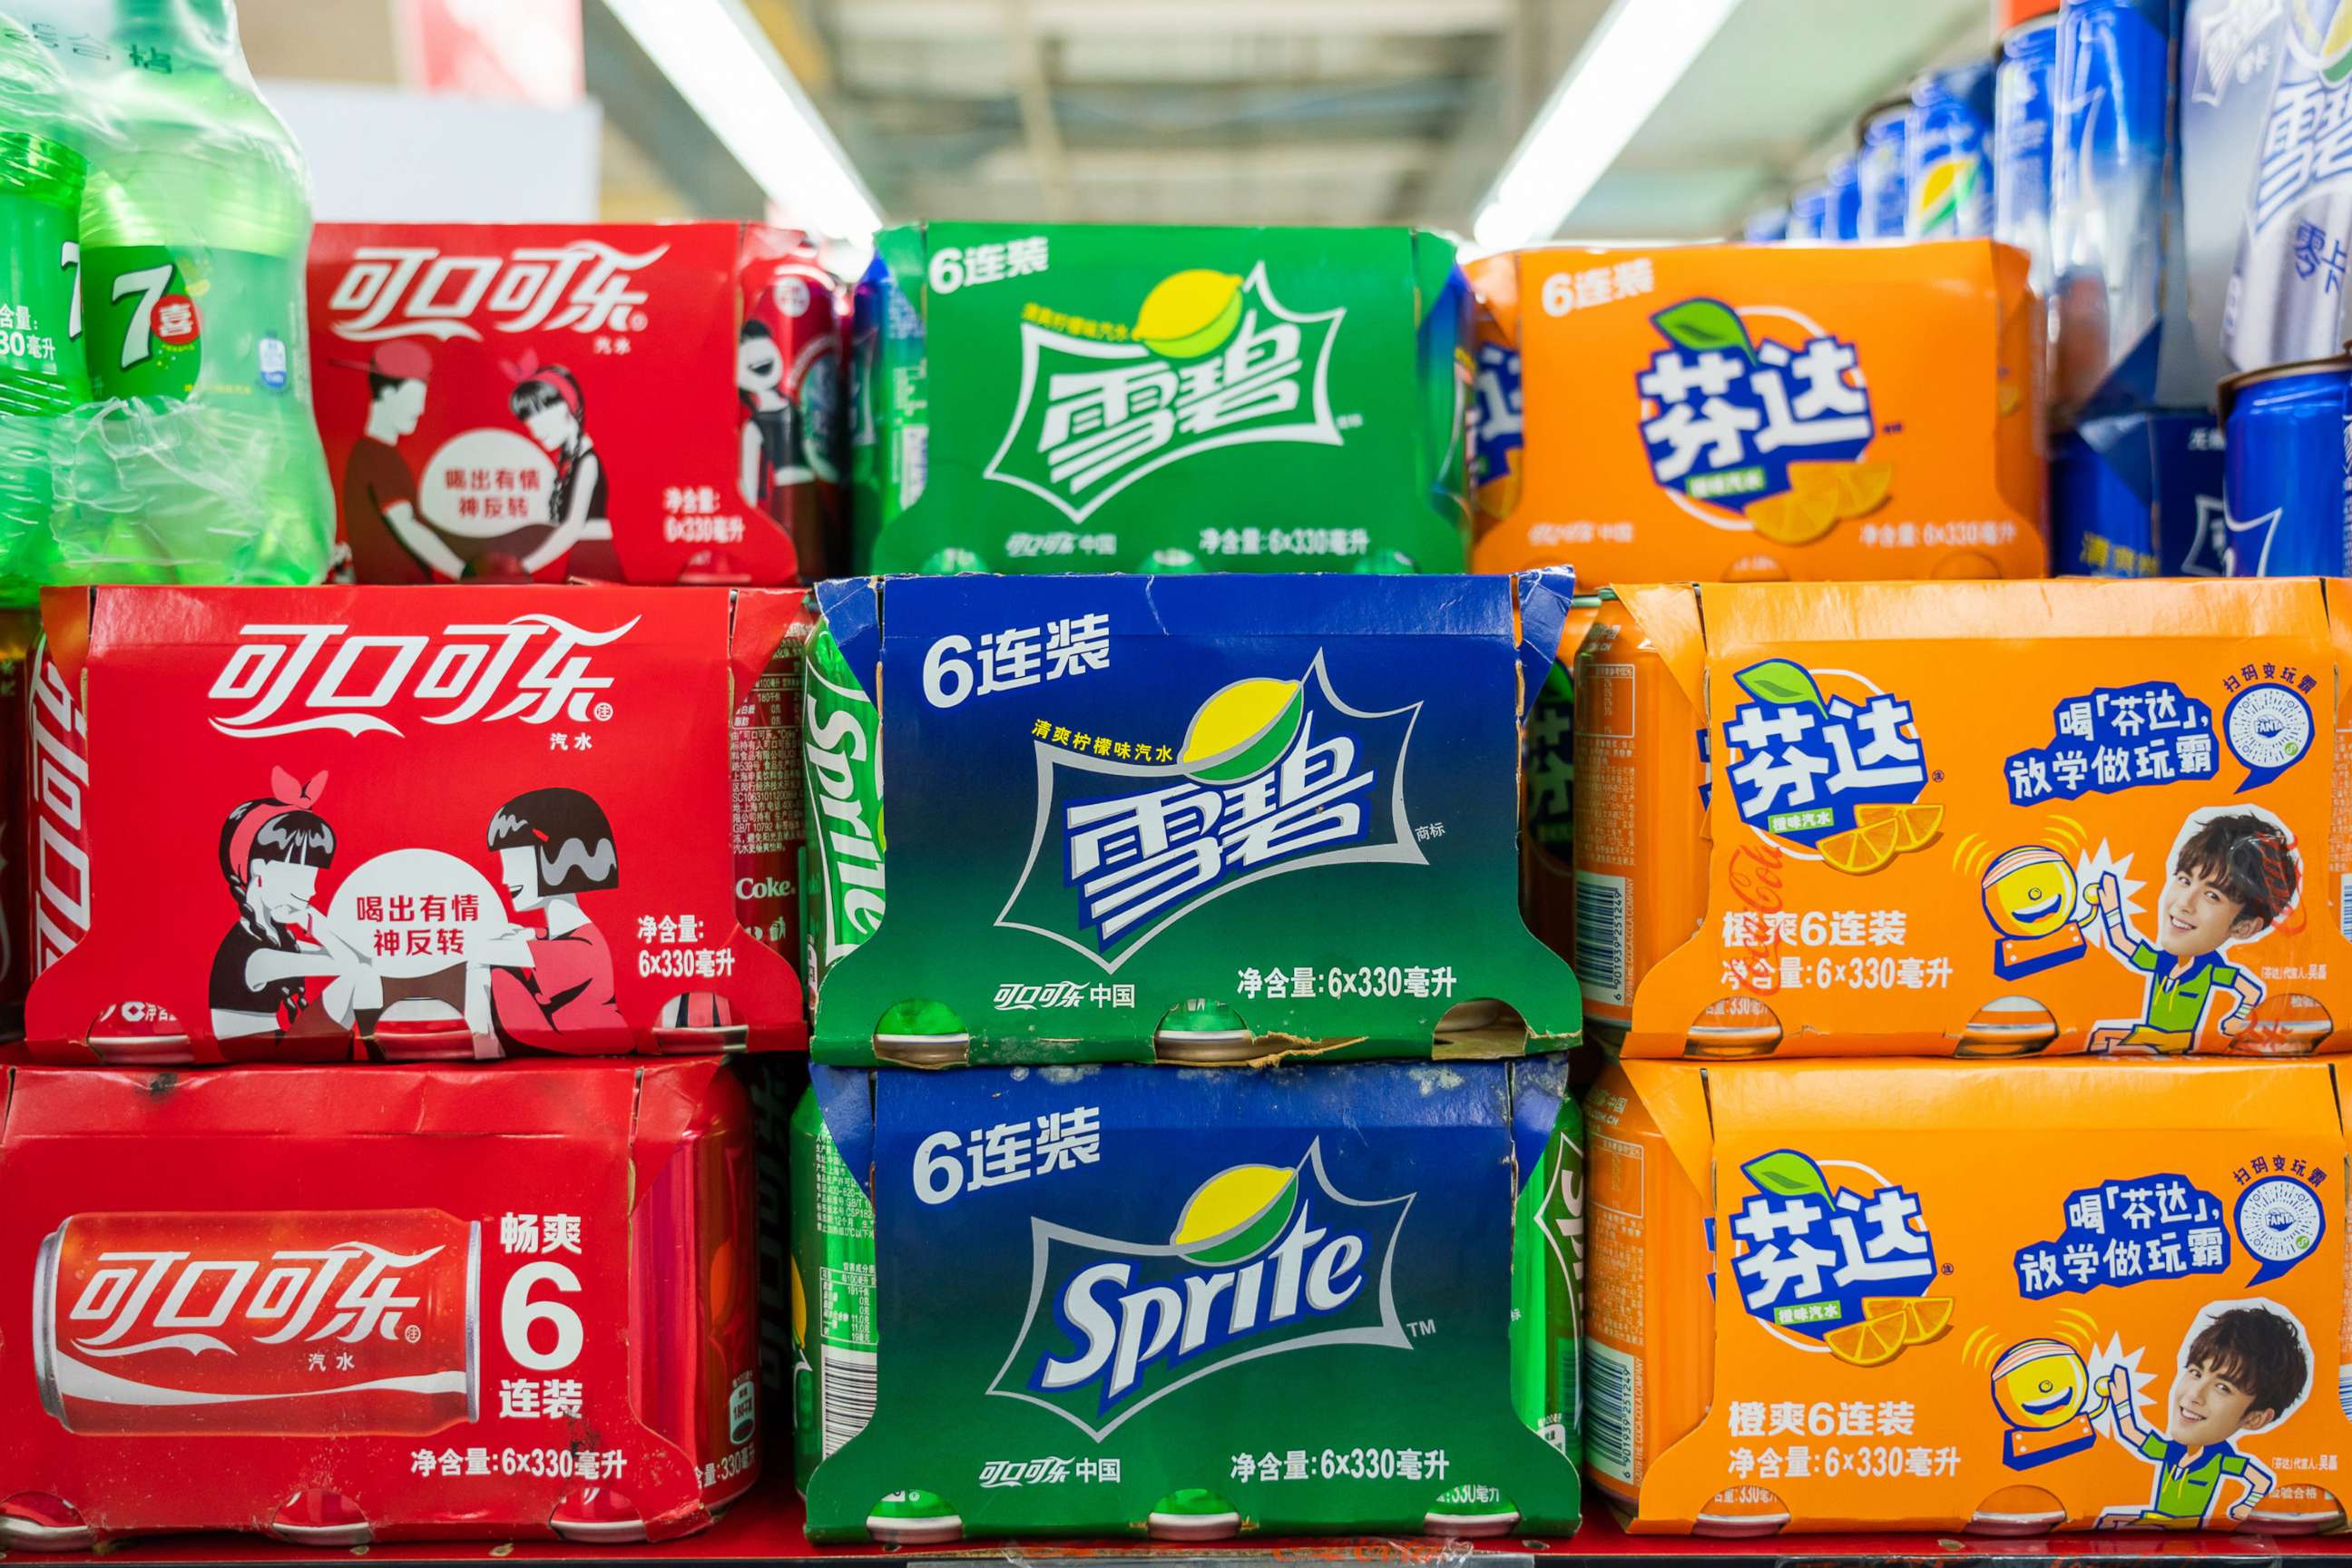 PHOTO: In this July, 27, 2019, file photo, cans of Coca-Cola, Sprite and Fanta, beverages produced by the Coca-Cola Company, are shown in a supermarket in Shanghai.